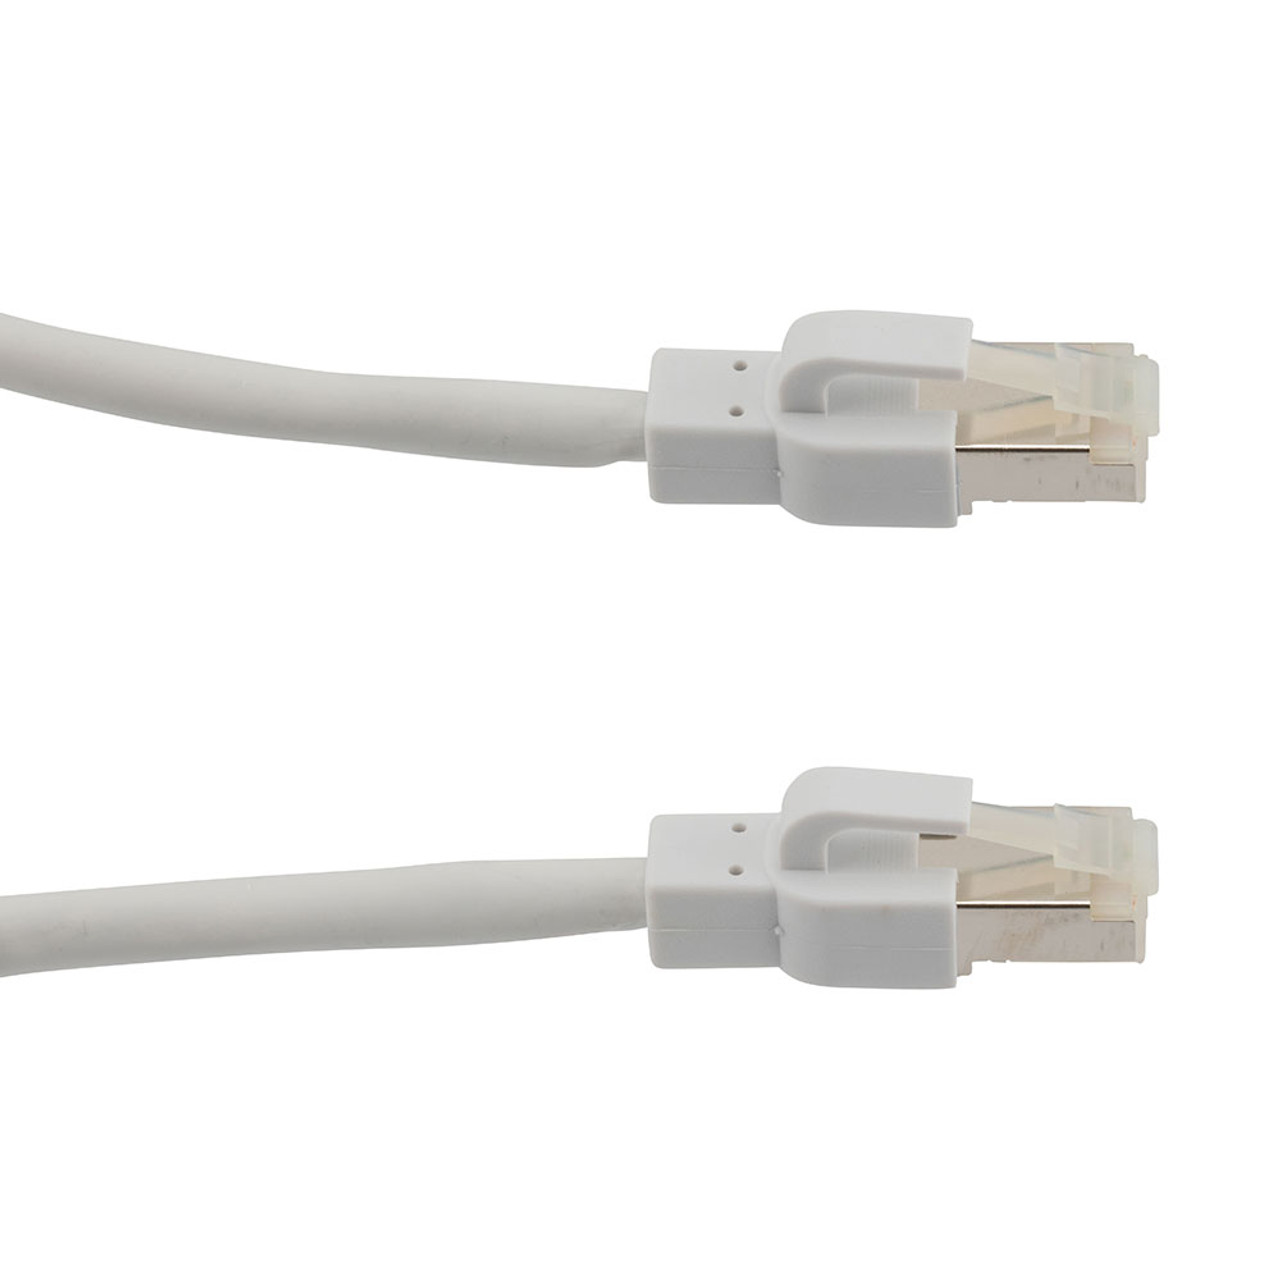 Category 6a 10 Gbps Ethernet Antibacterial Antimicrobial Cable Assembly, RJ45 Male/Plug, S/FTP, CM LSZH, 26 AWG, ANTIBACTERIAL LSZH, White, 25 FT